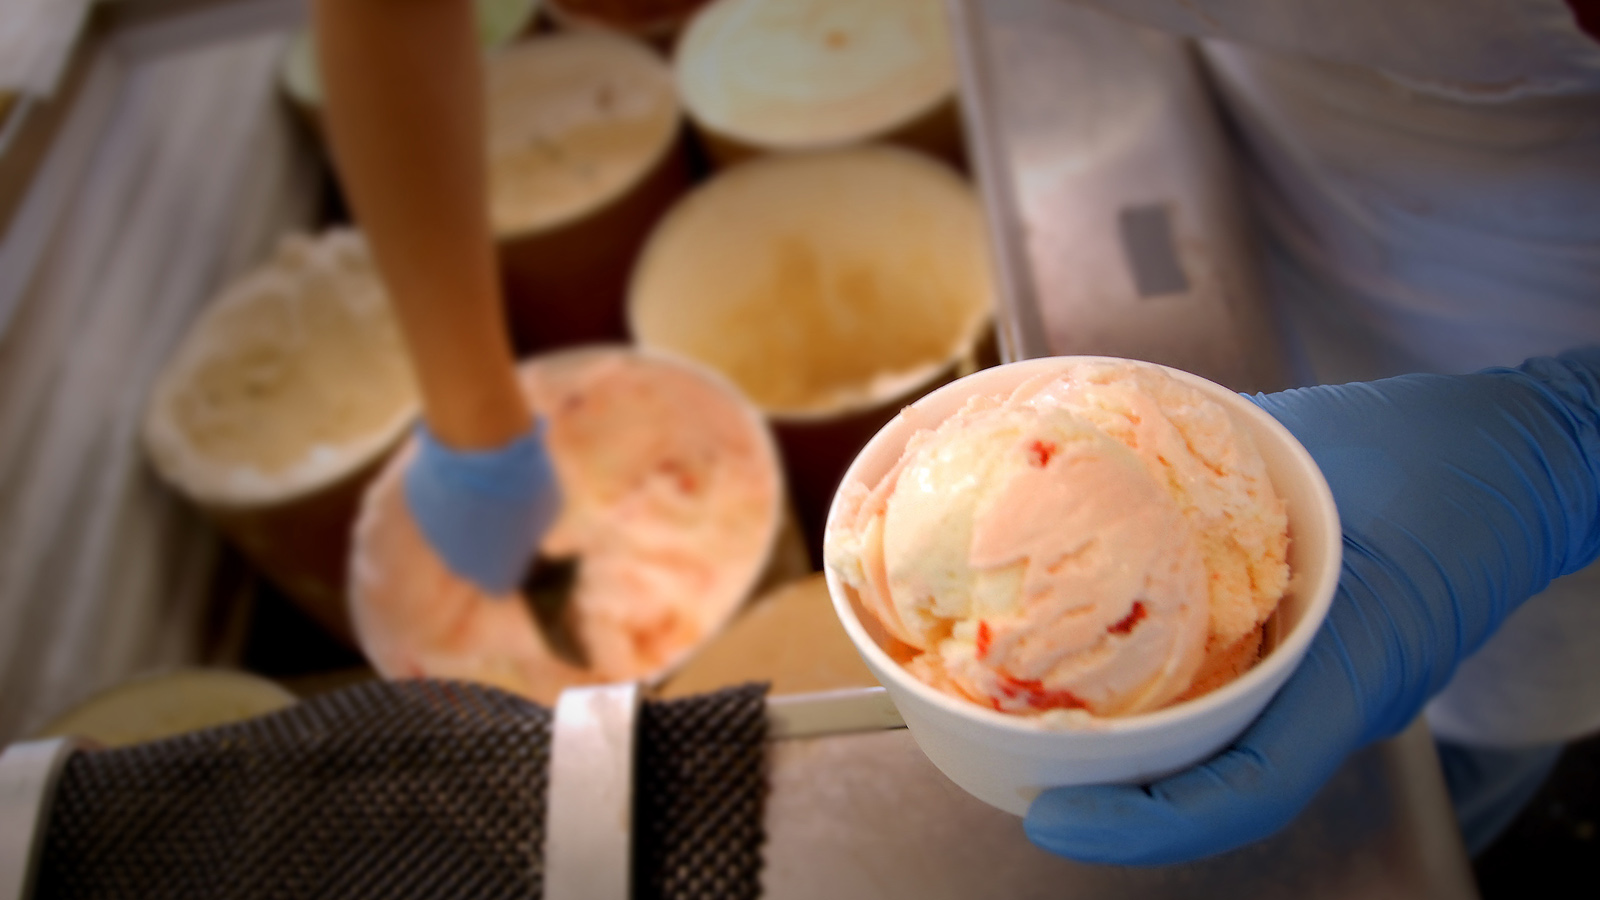 Gloved hands scooping a cup of NC State University's Howling Cow ice cream.